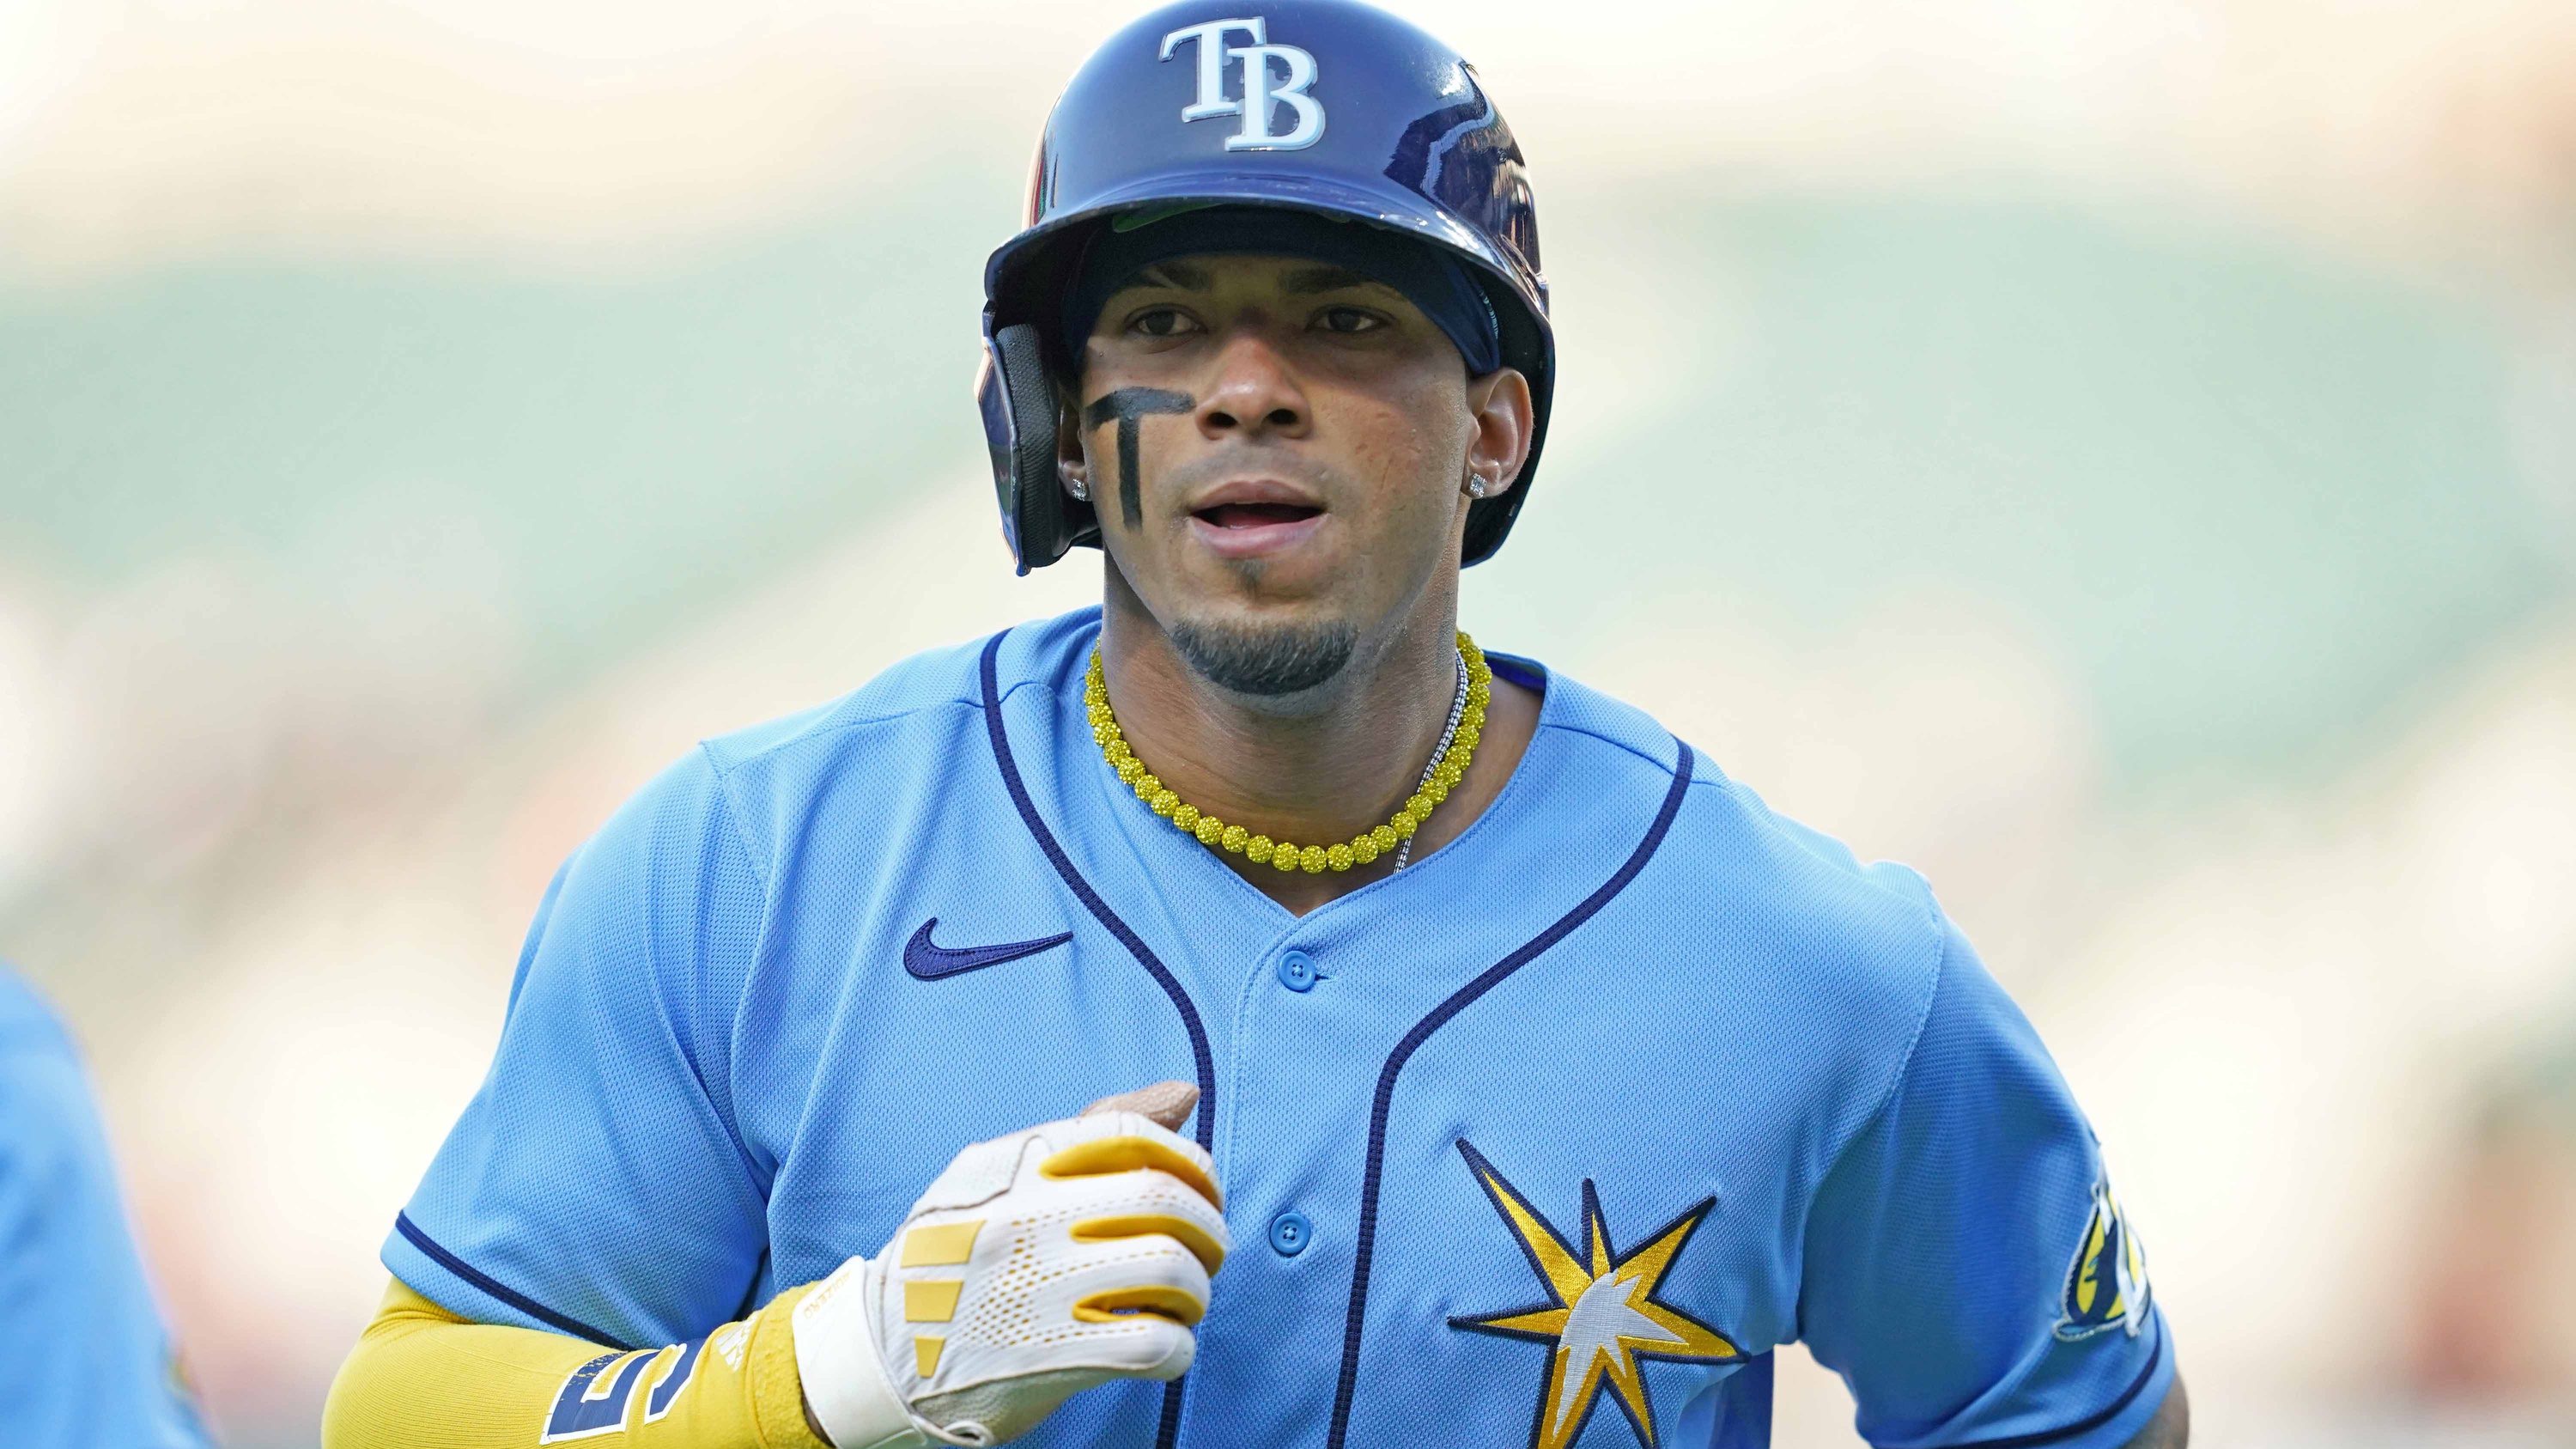 Rays Place Wander Franco on Leave Pending MLB Investigation - WSJ